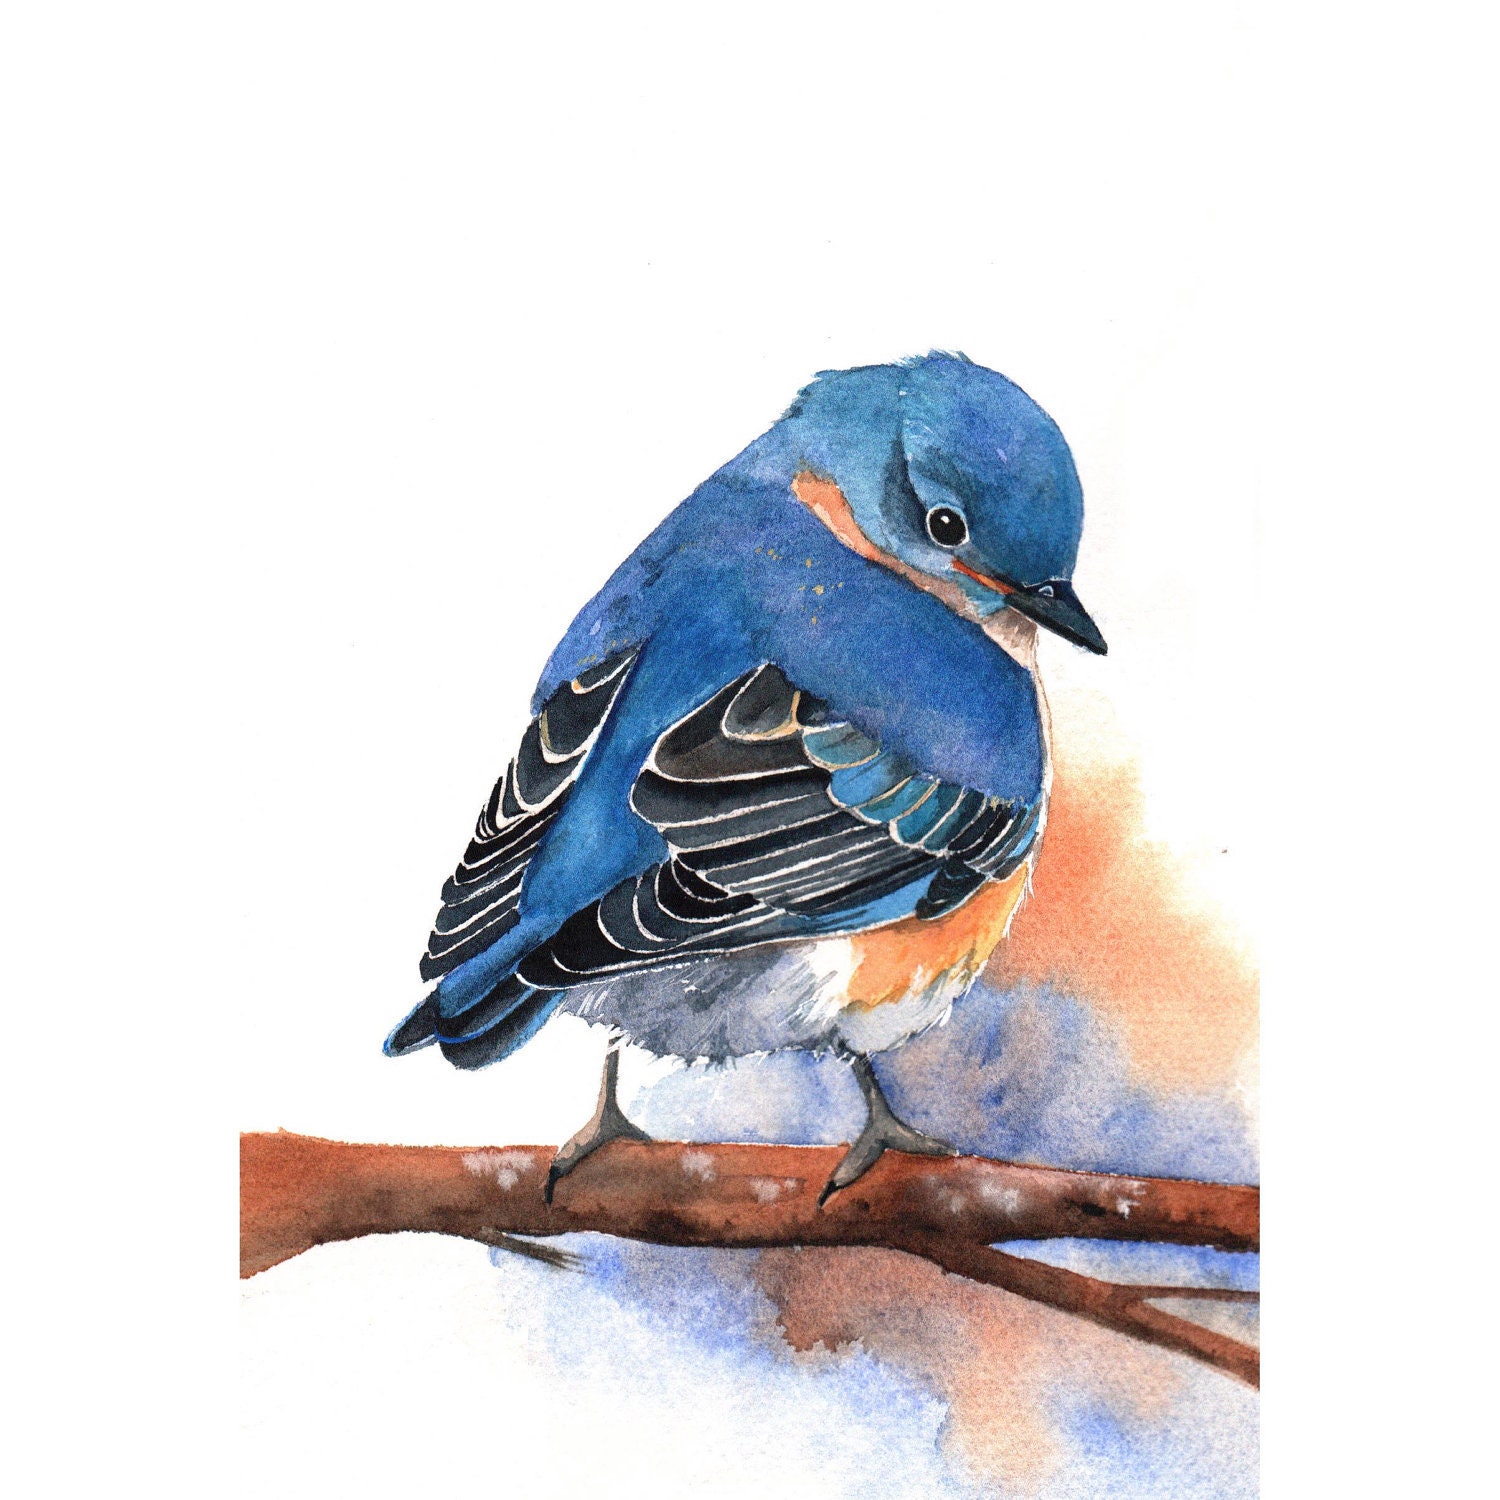 Bluebird Painting -B029-  Archival Print of bird watercolor painting 5 by 7